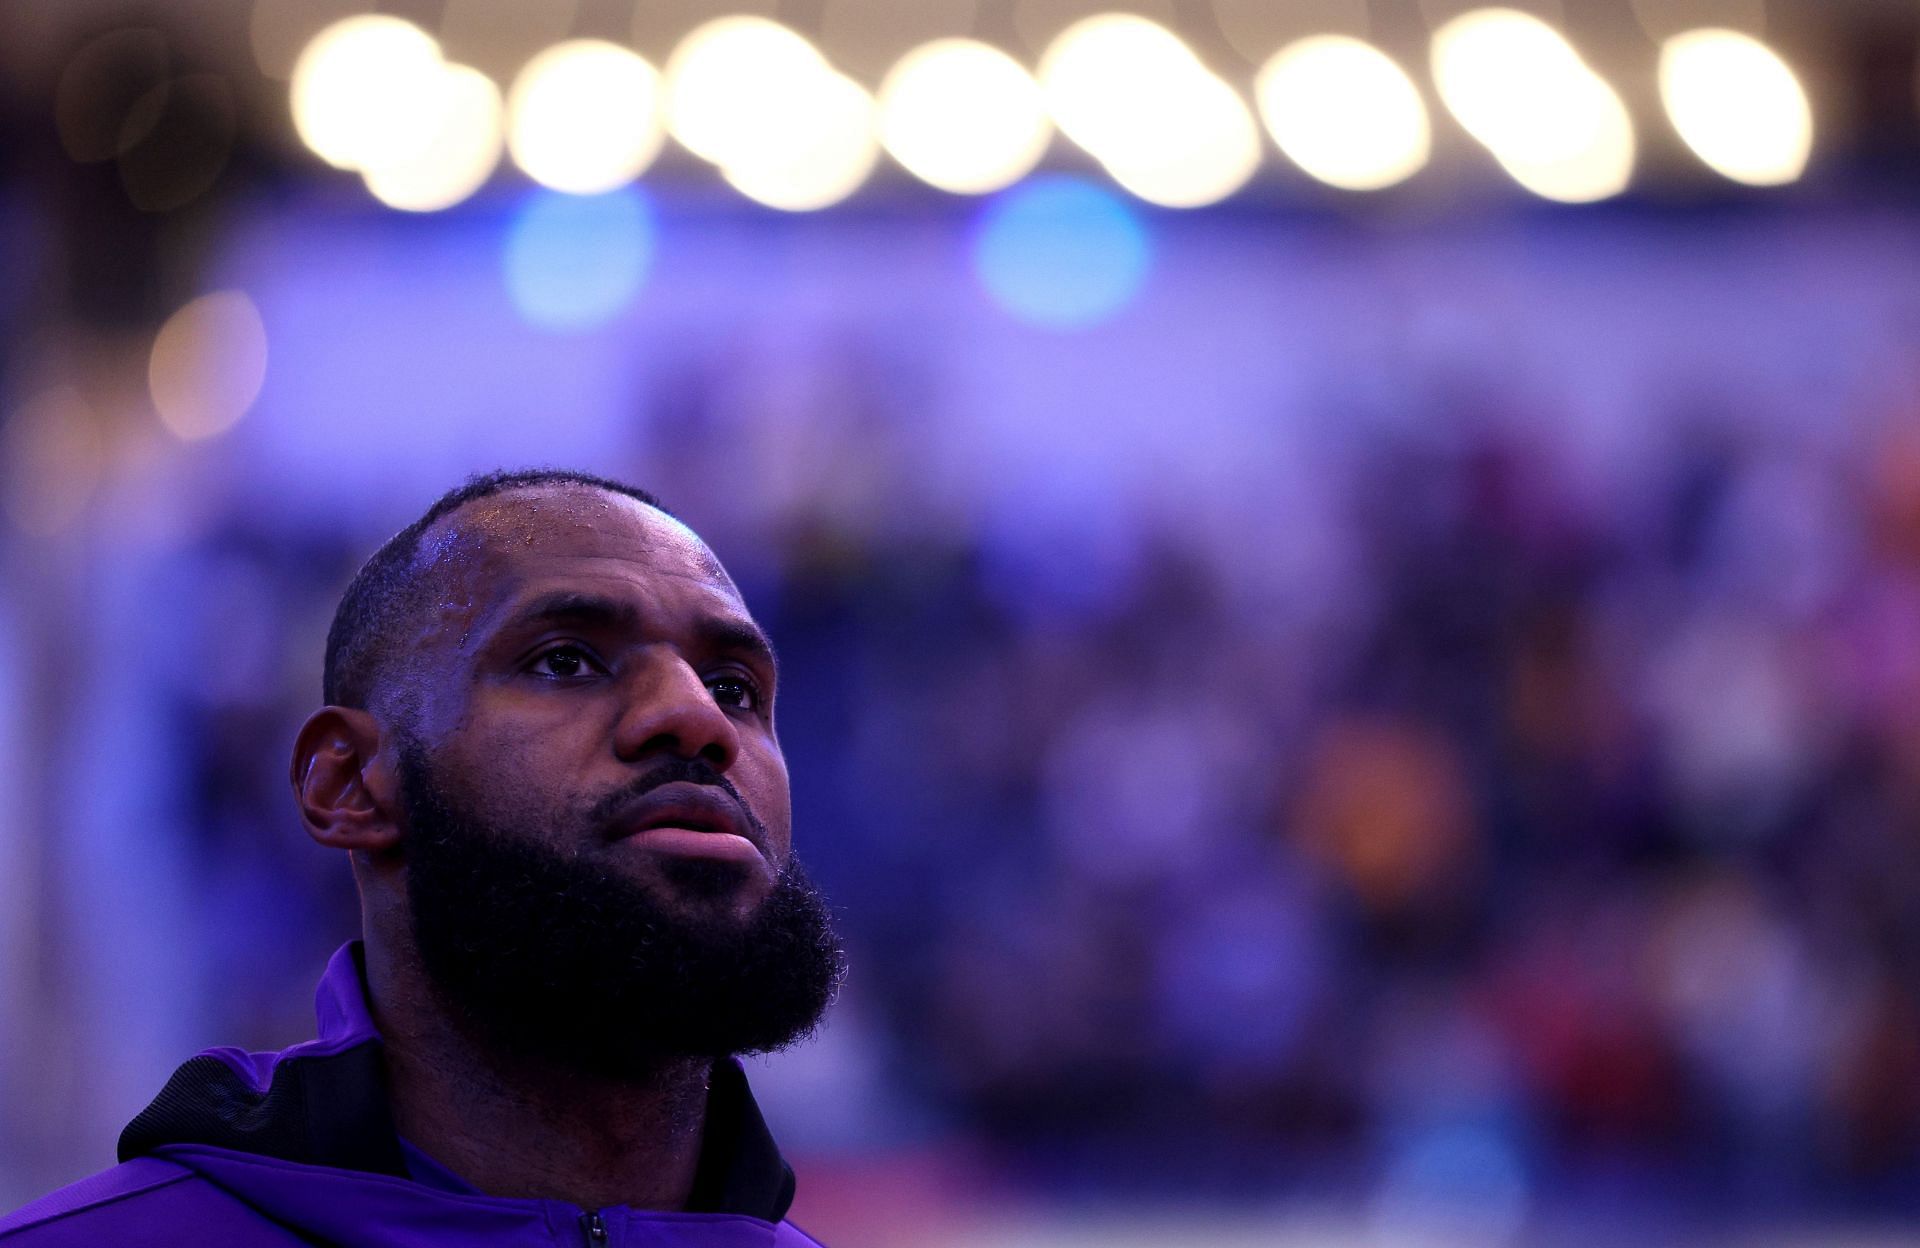 Los Angeles Lakers superstar LeBron James has had a massive impact on his community